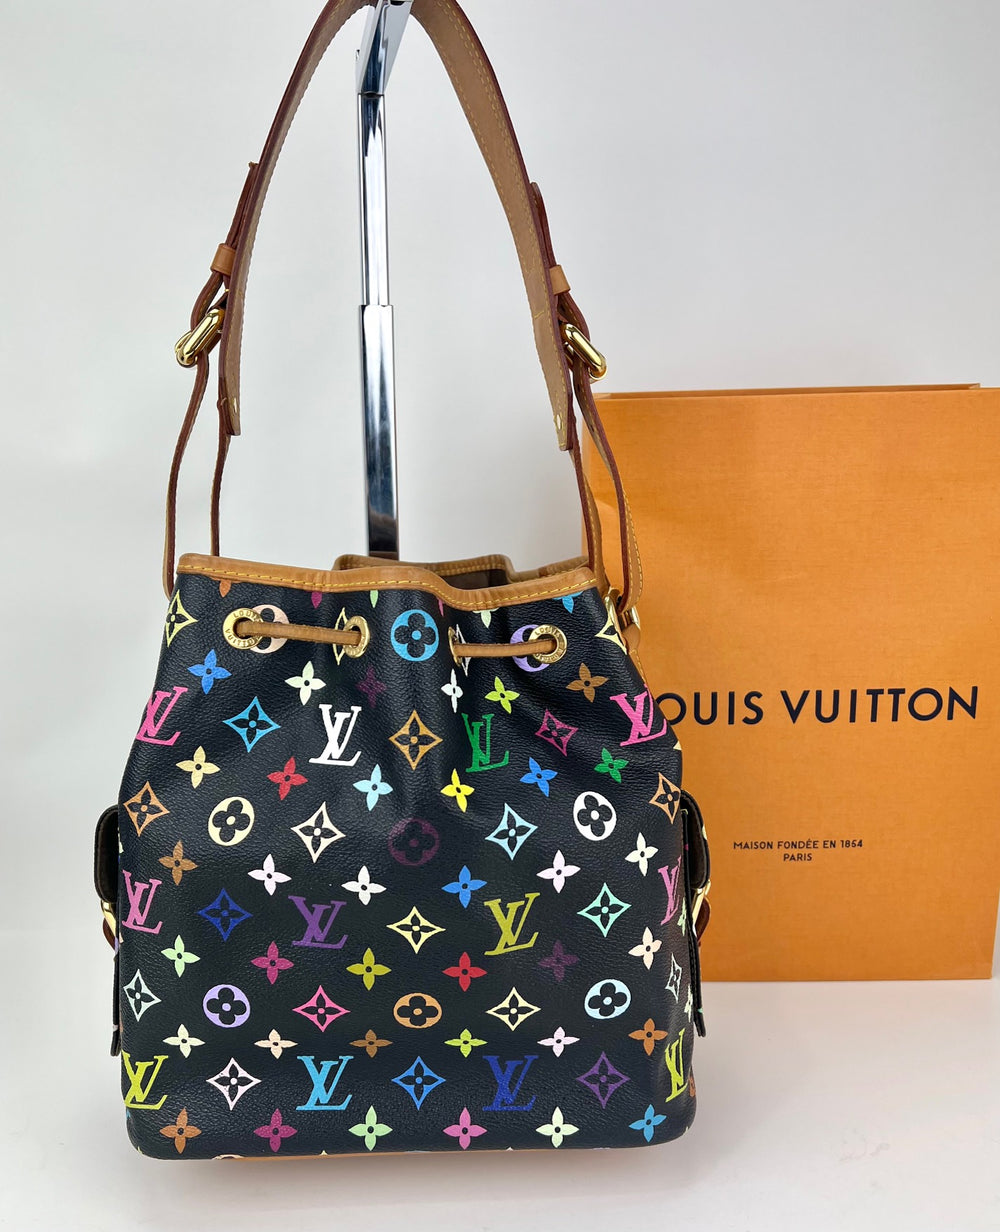 Louis Vuitton NeoNoe  Bag Review/What's In My Bag/What Fits Inside 